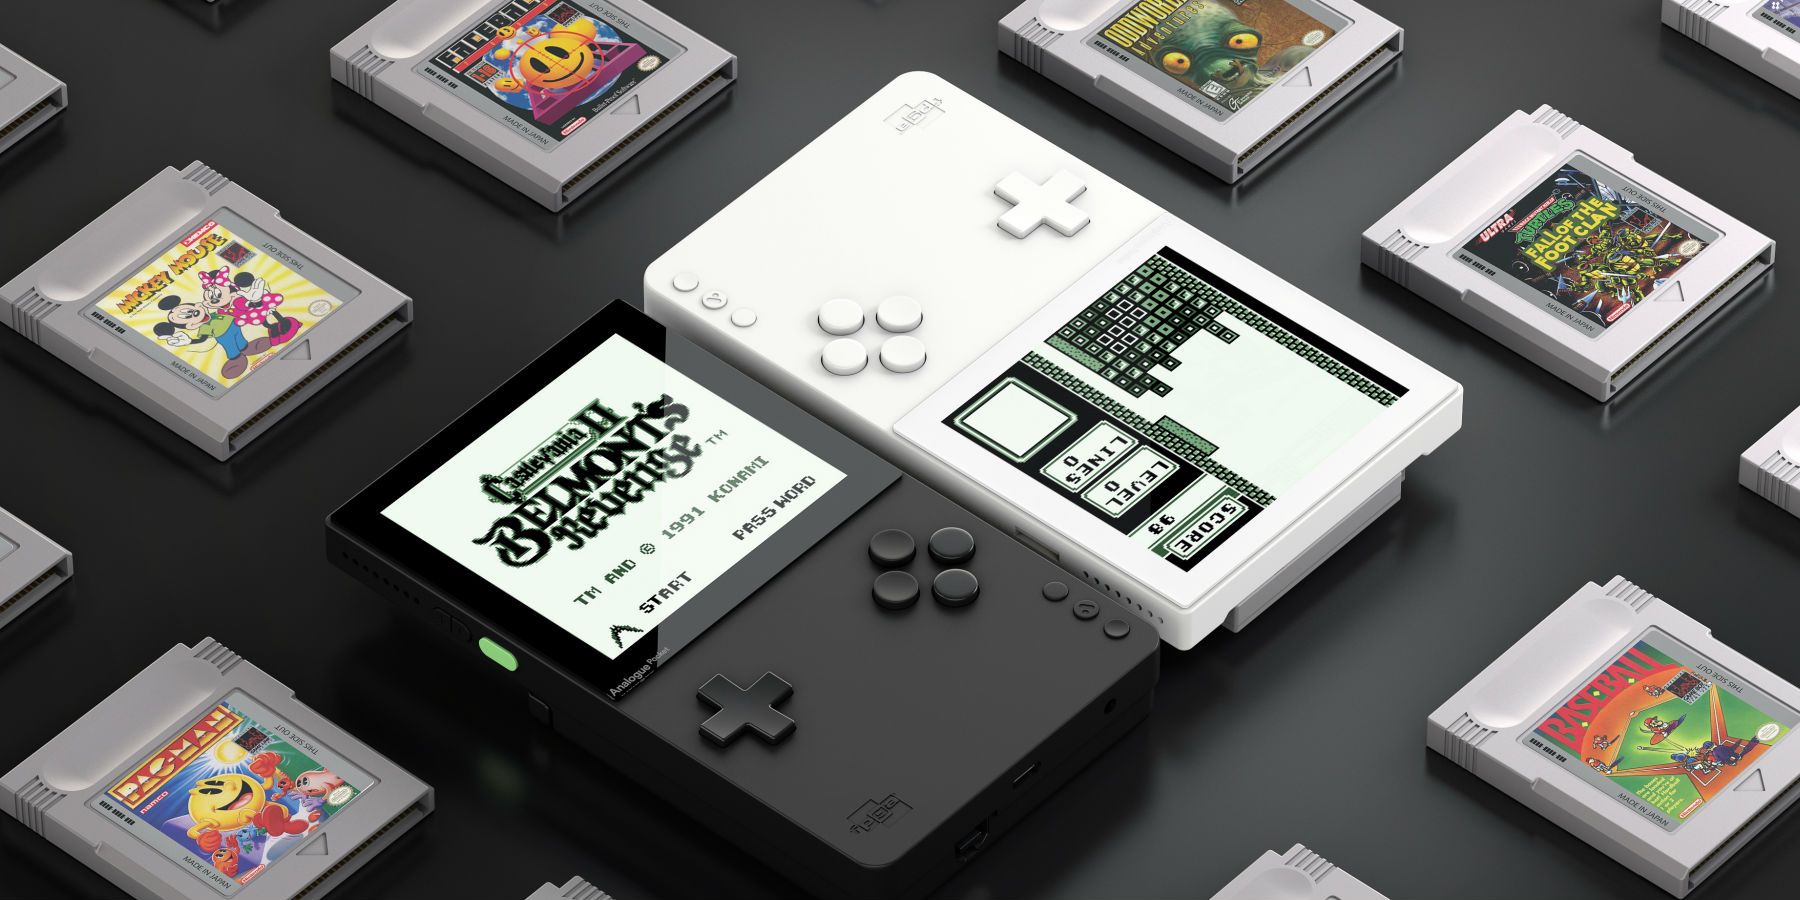 Analogue Pocket and Games featured